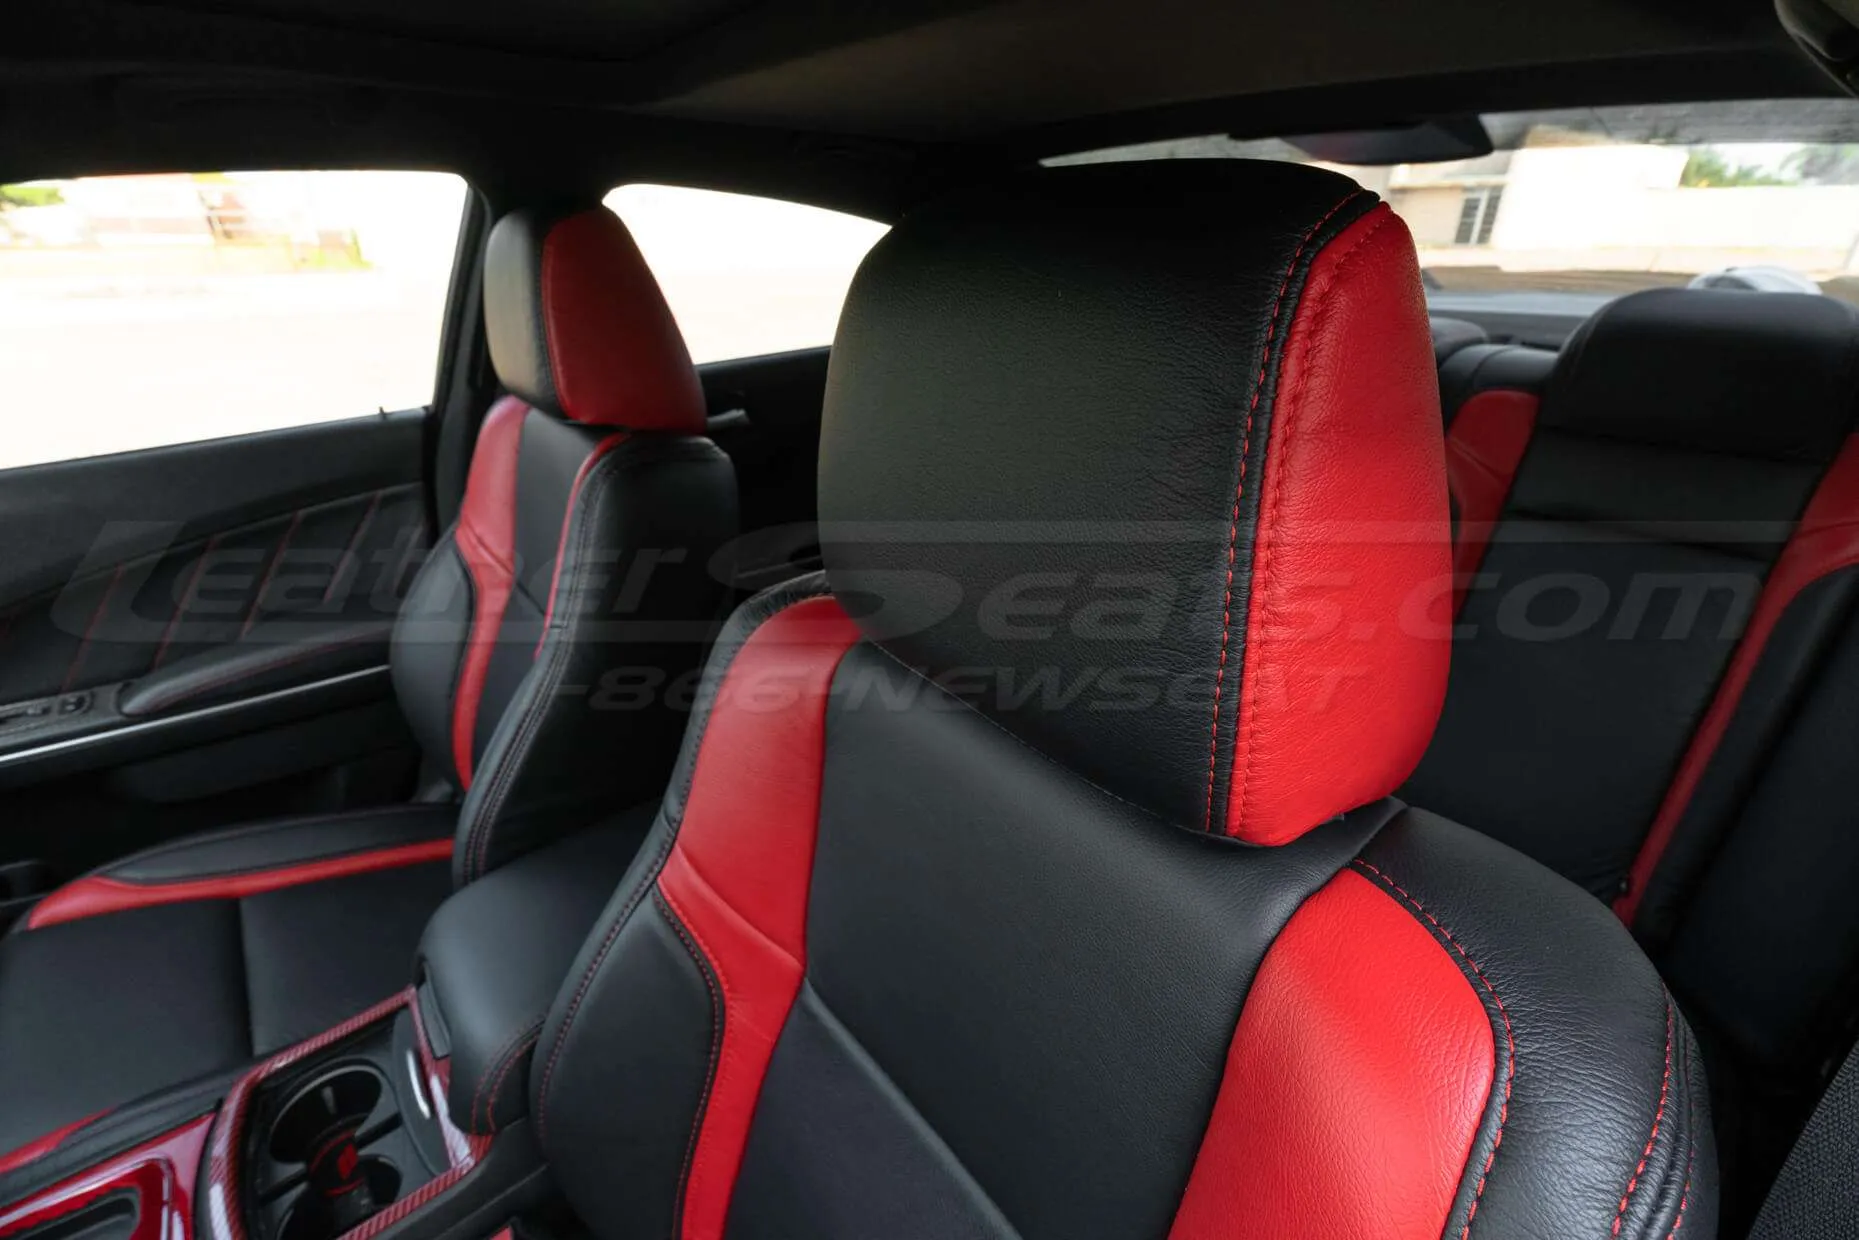 Black & Bright Red Dodge Charger Headrest